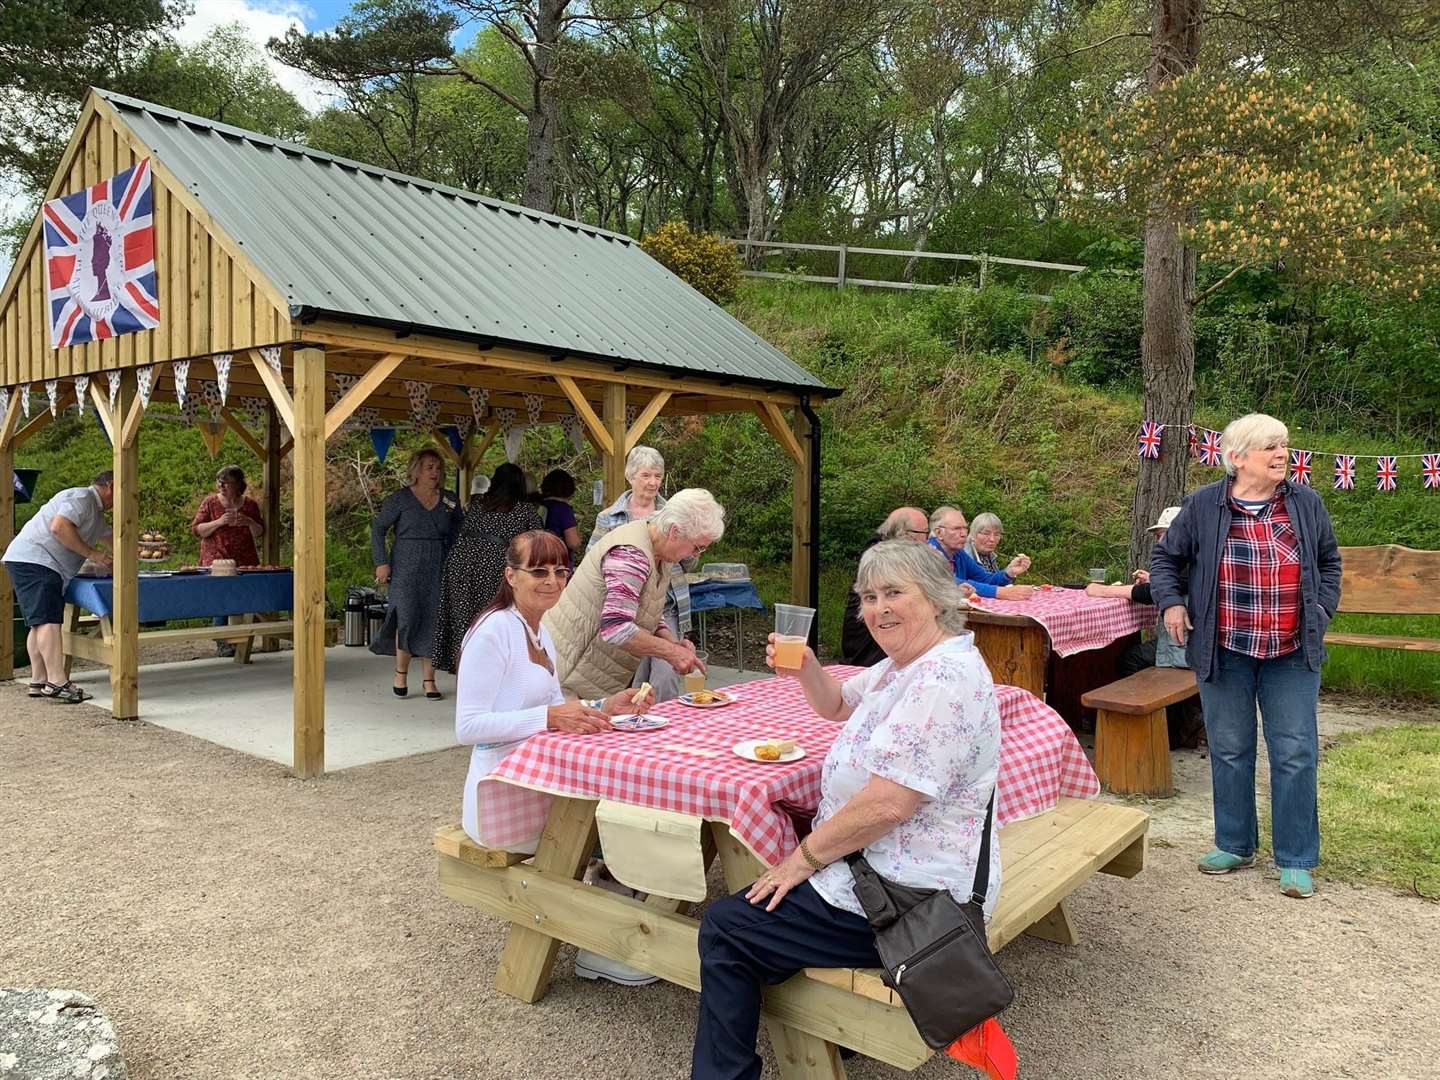 The jubilee picnic was a great opportunity for the Lairg community to get together and “toast” the Queen’s 70 years of service over a cuppa and some delicious sandwiches.